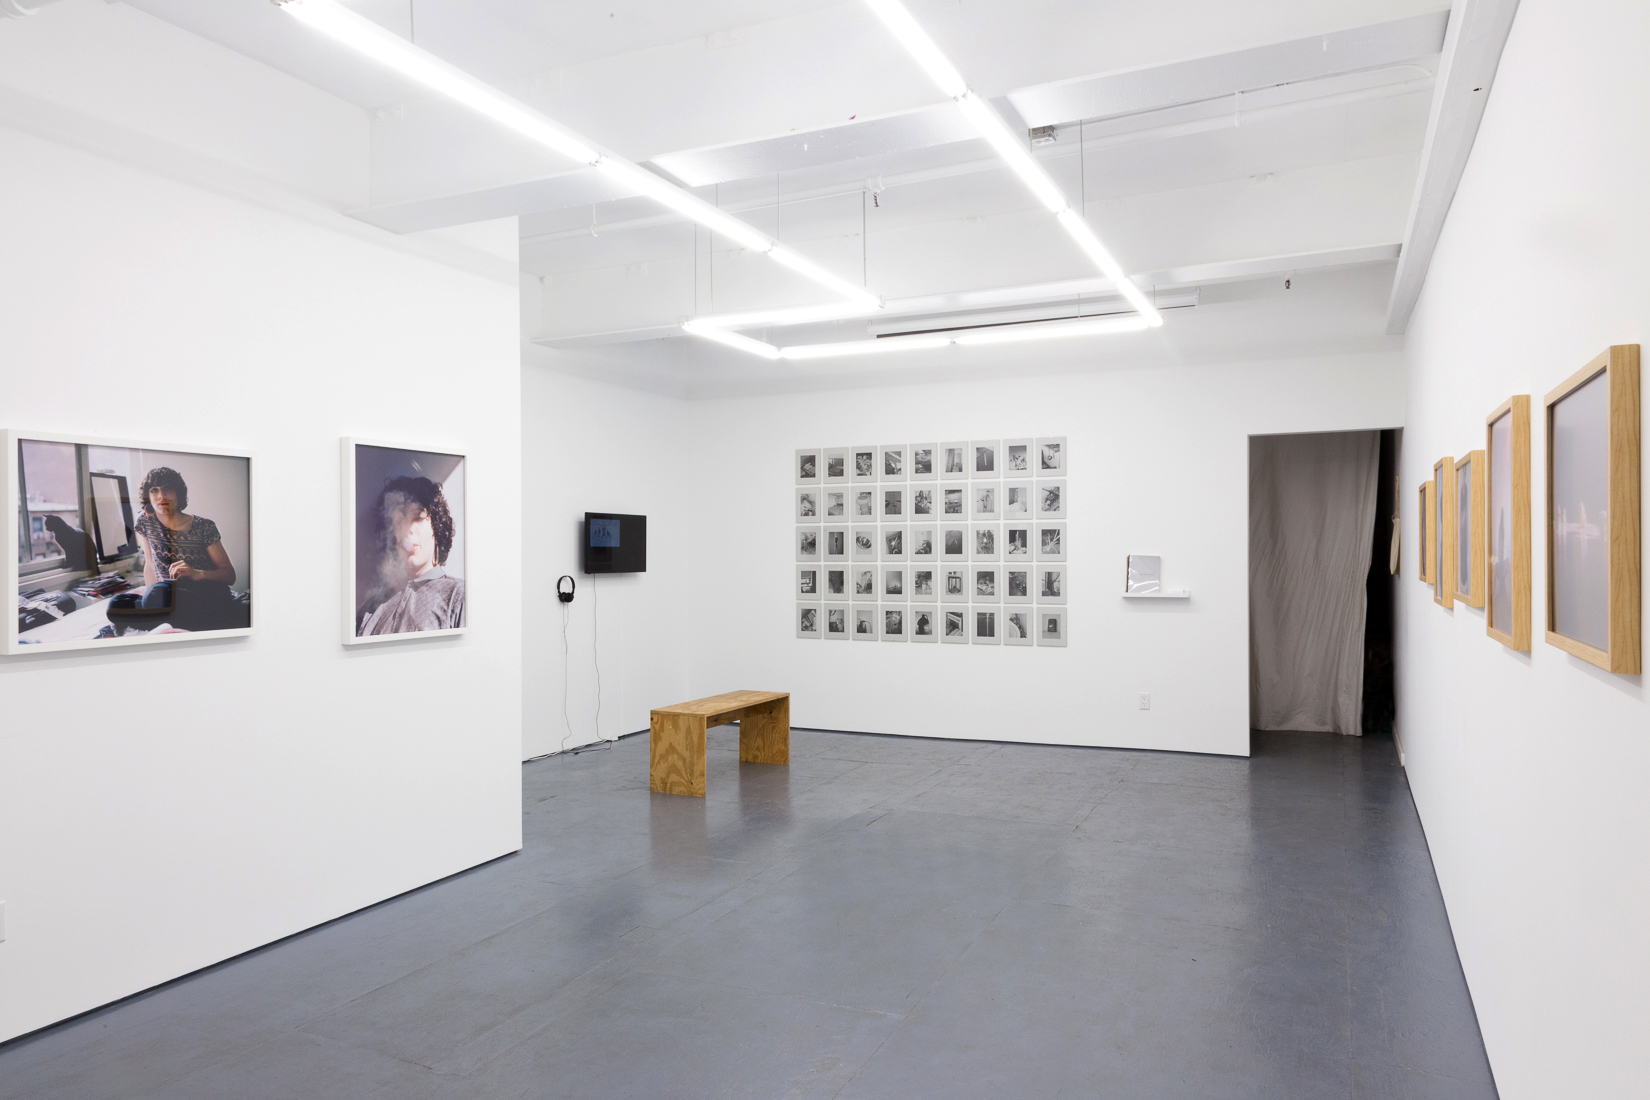  Installation view of the exhibition The Blue Distance at Transmitter 